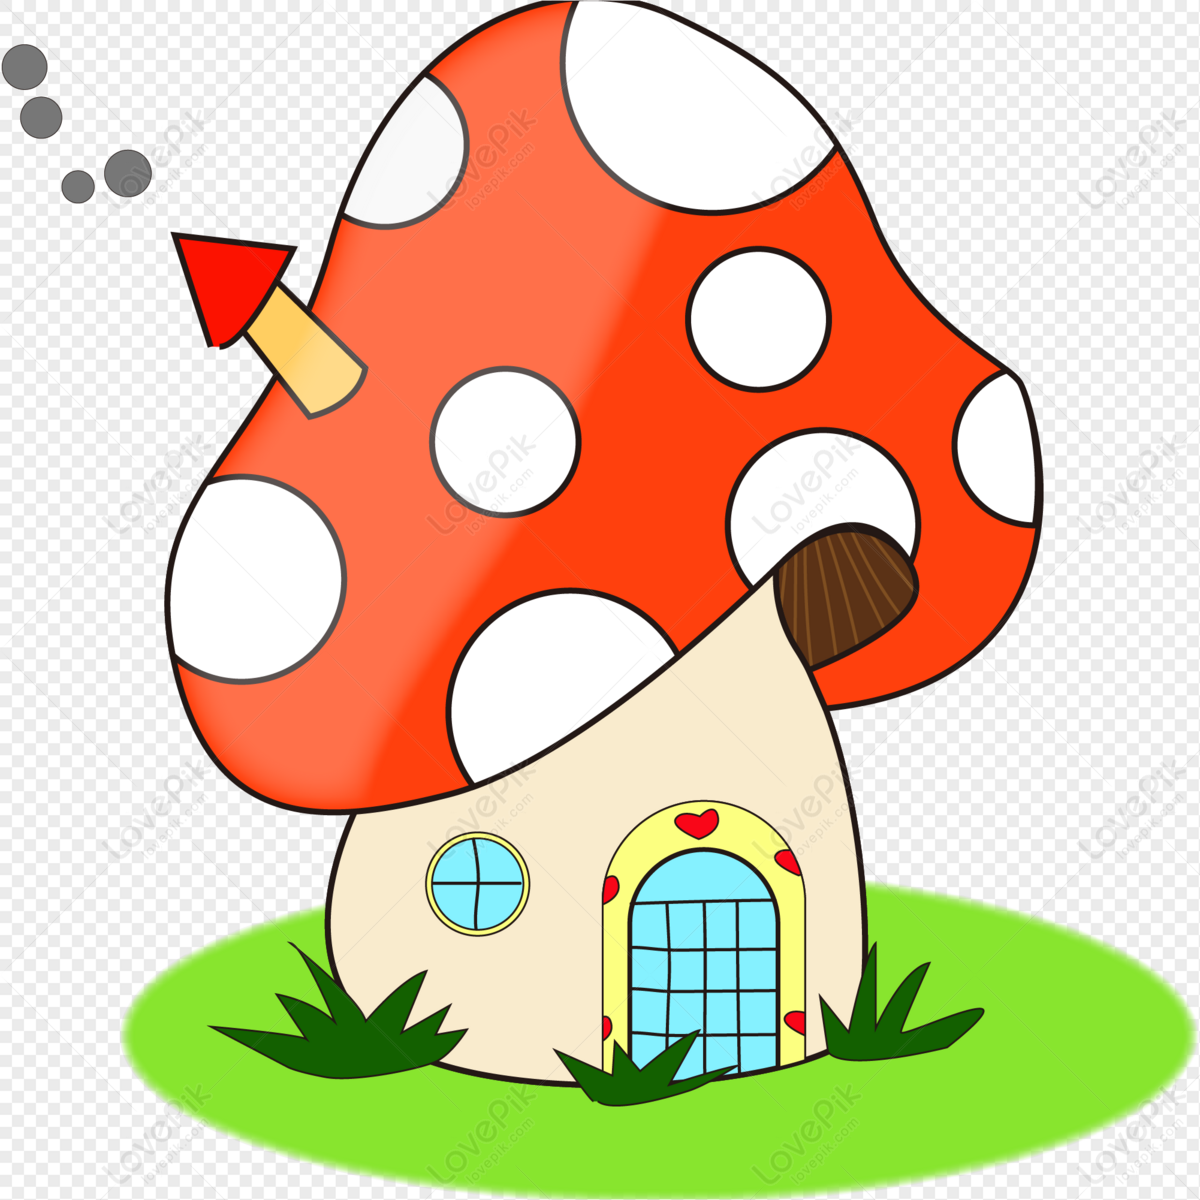 Cartoon Mushroom House PNG Transparent Image And Clipart Image For Free  Download - Lovepik | 401195147